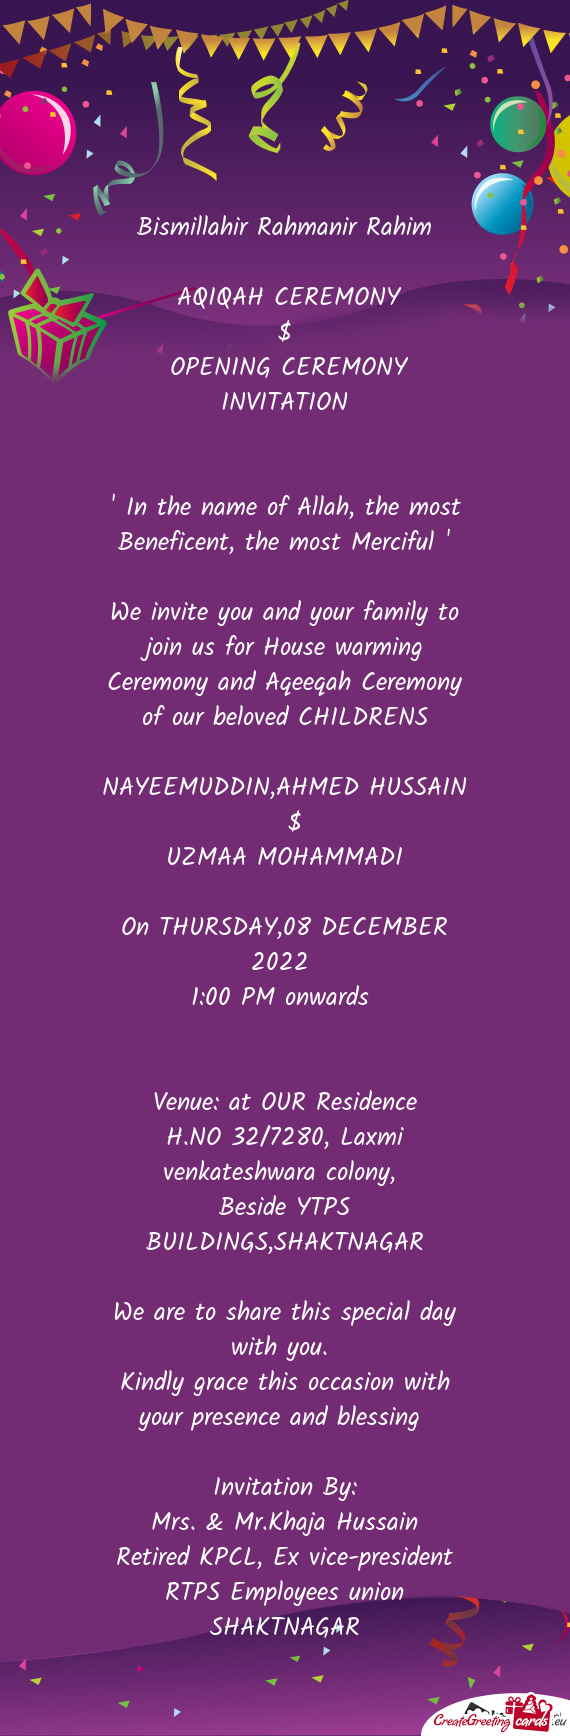 We invite you and your family to join us for House warming Ceremony and Aqeeqah Ceremony of our belo